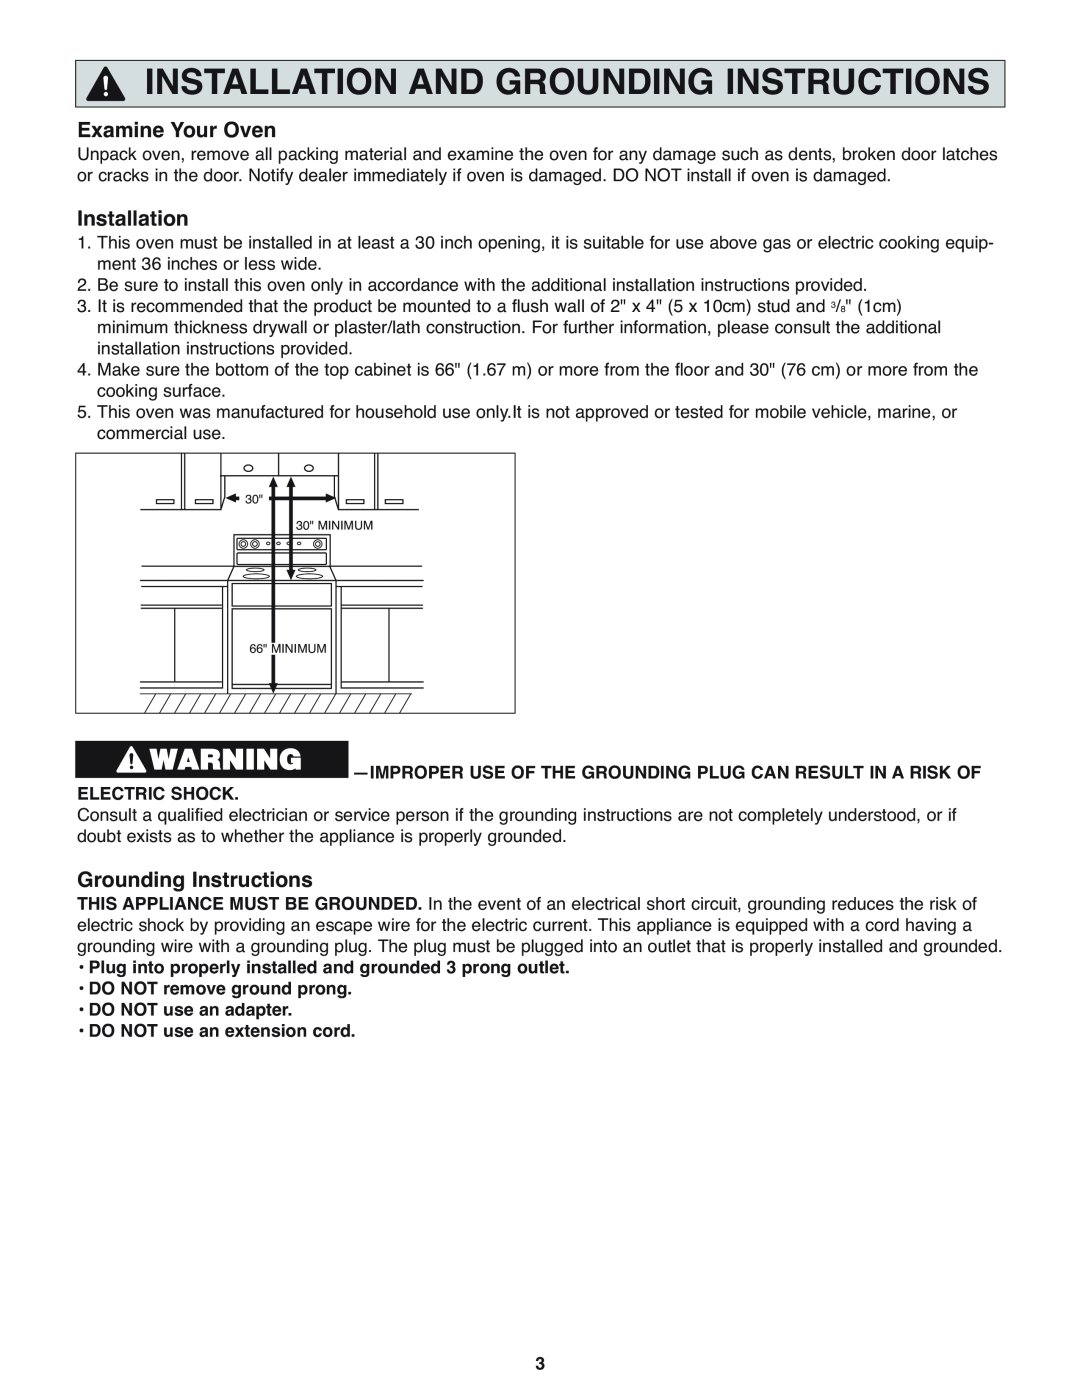 Panasonic NN-H275 operating instructions Installation And Grounding Instructions, Examine Your Oven 